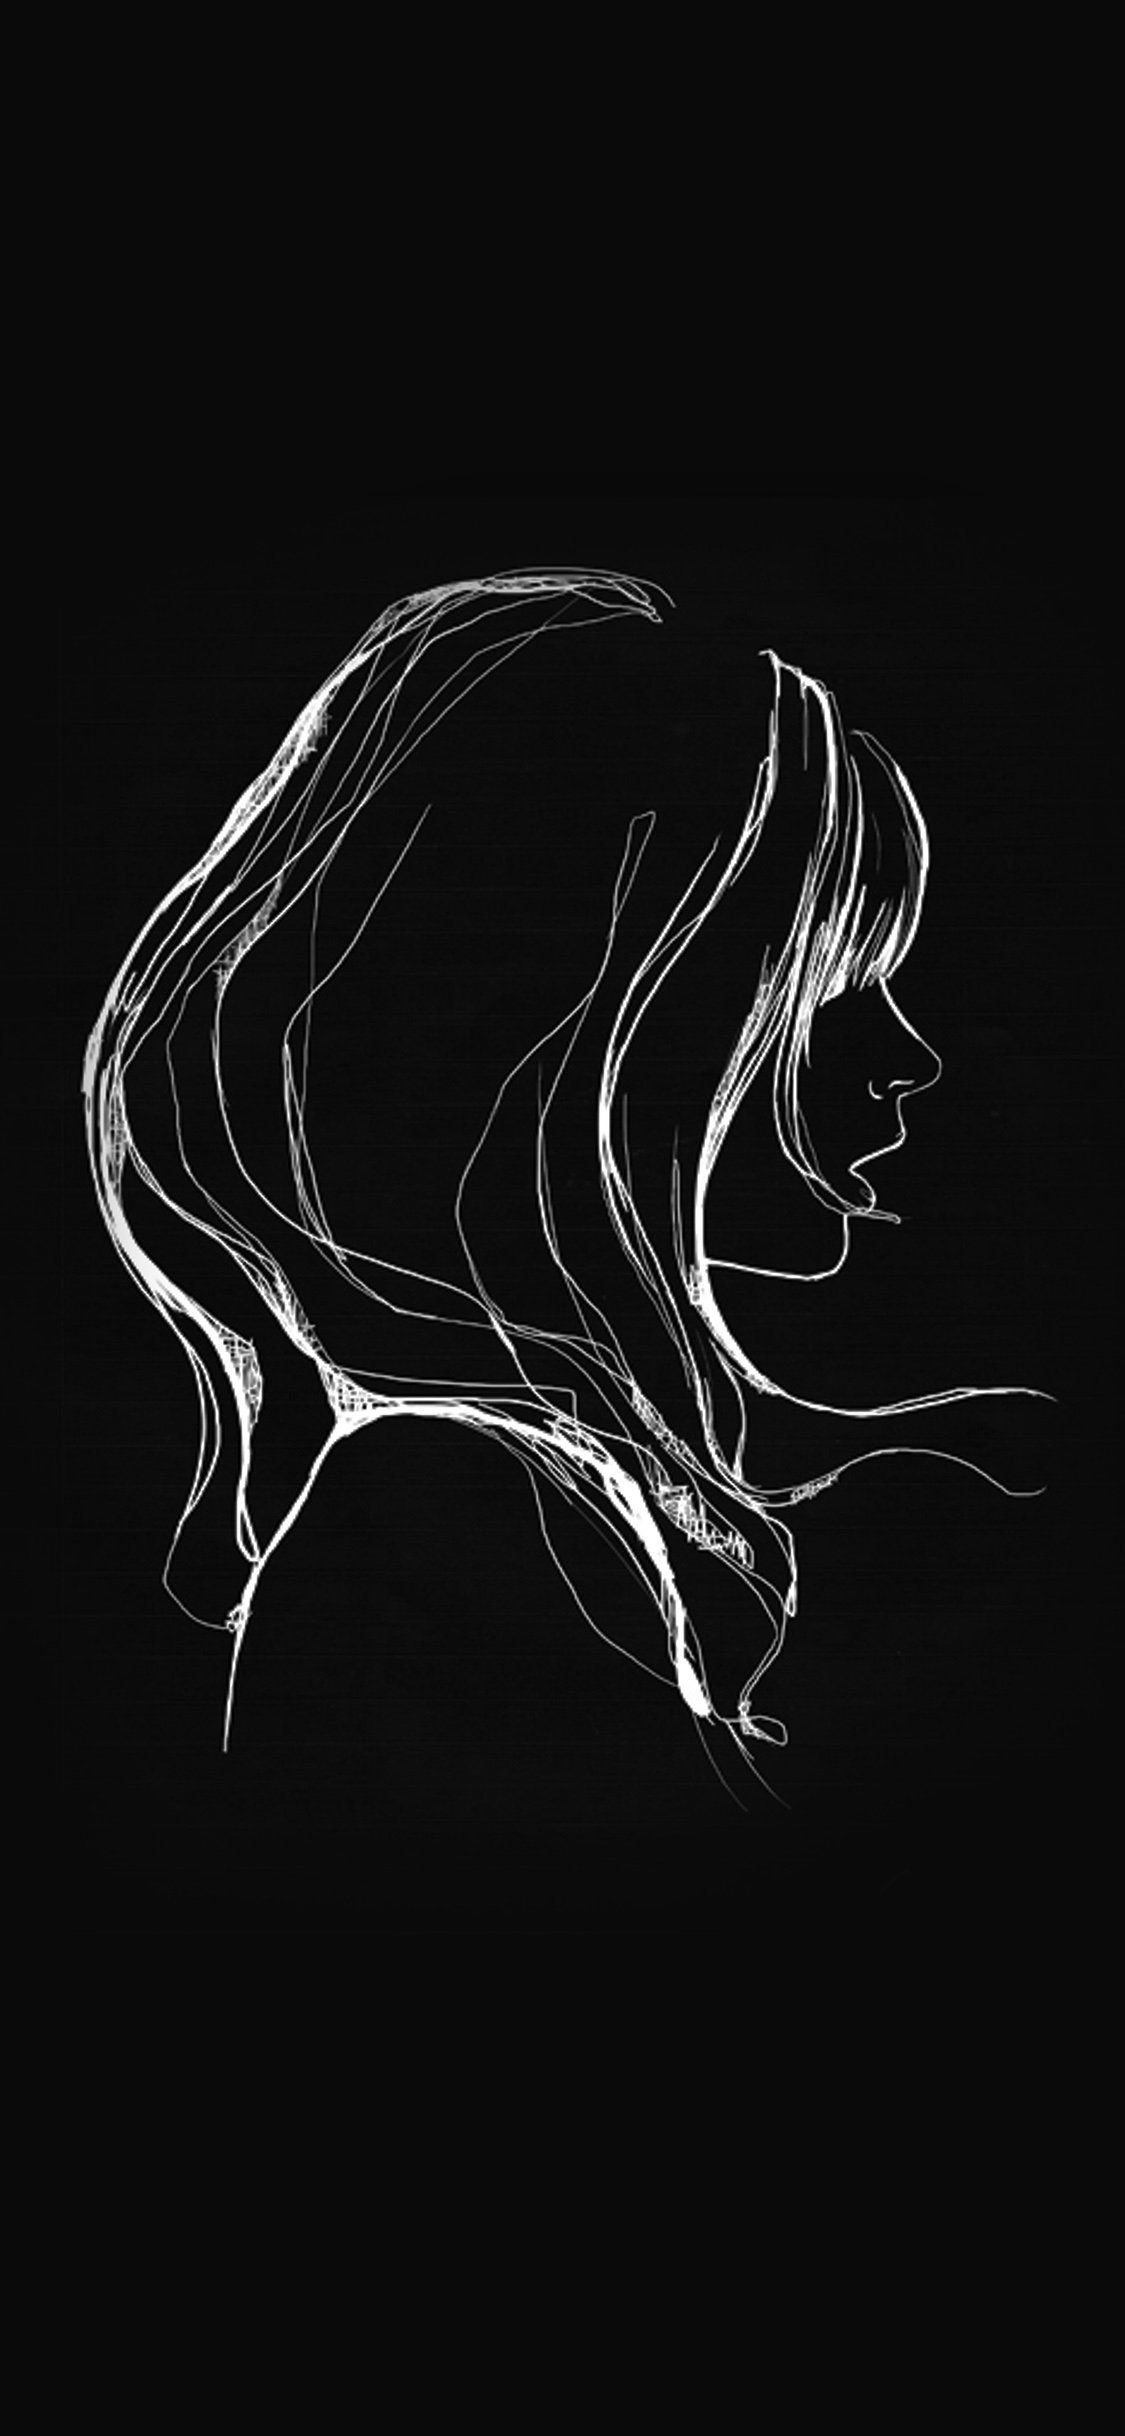 Black and White Drawing Wallpaper Free Black and White Drawing Background